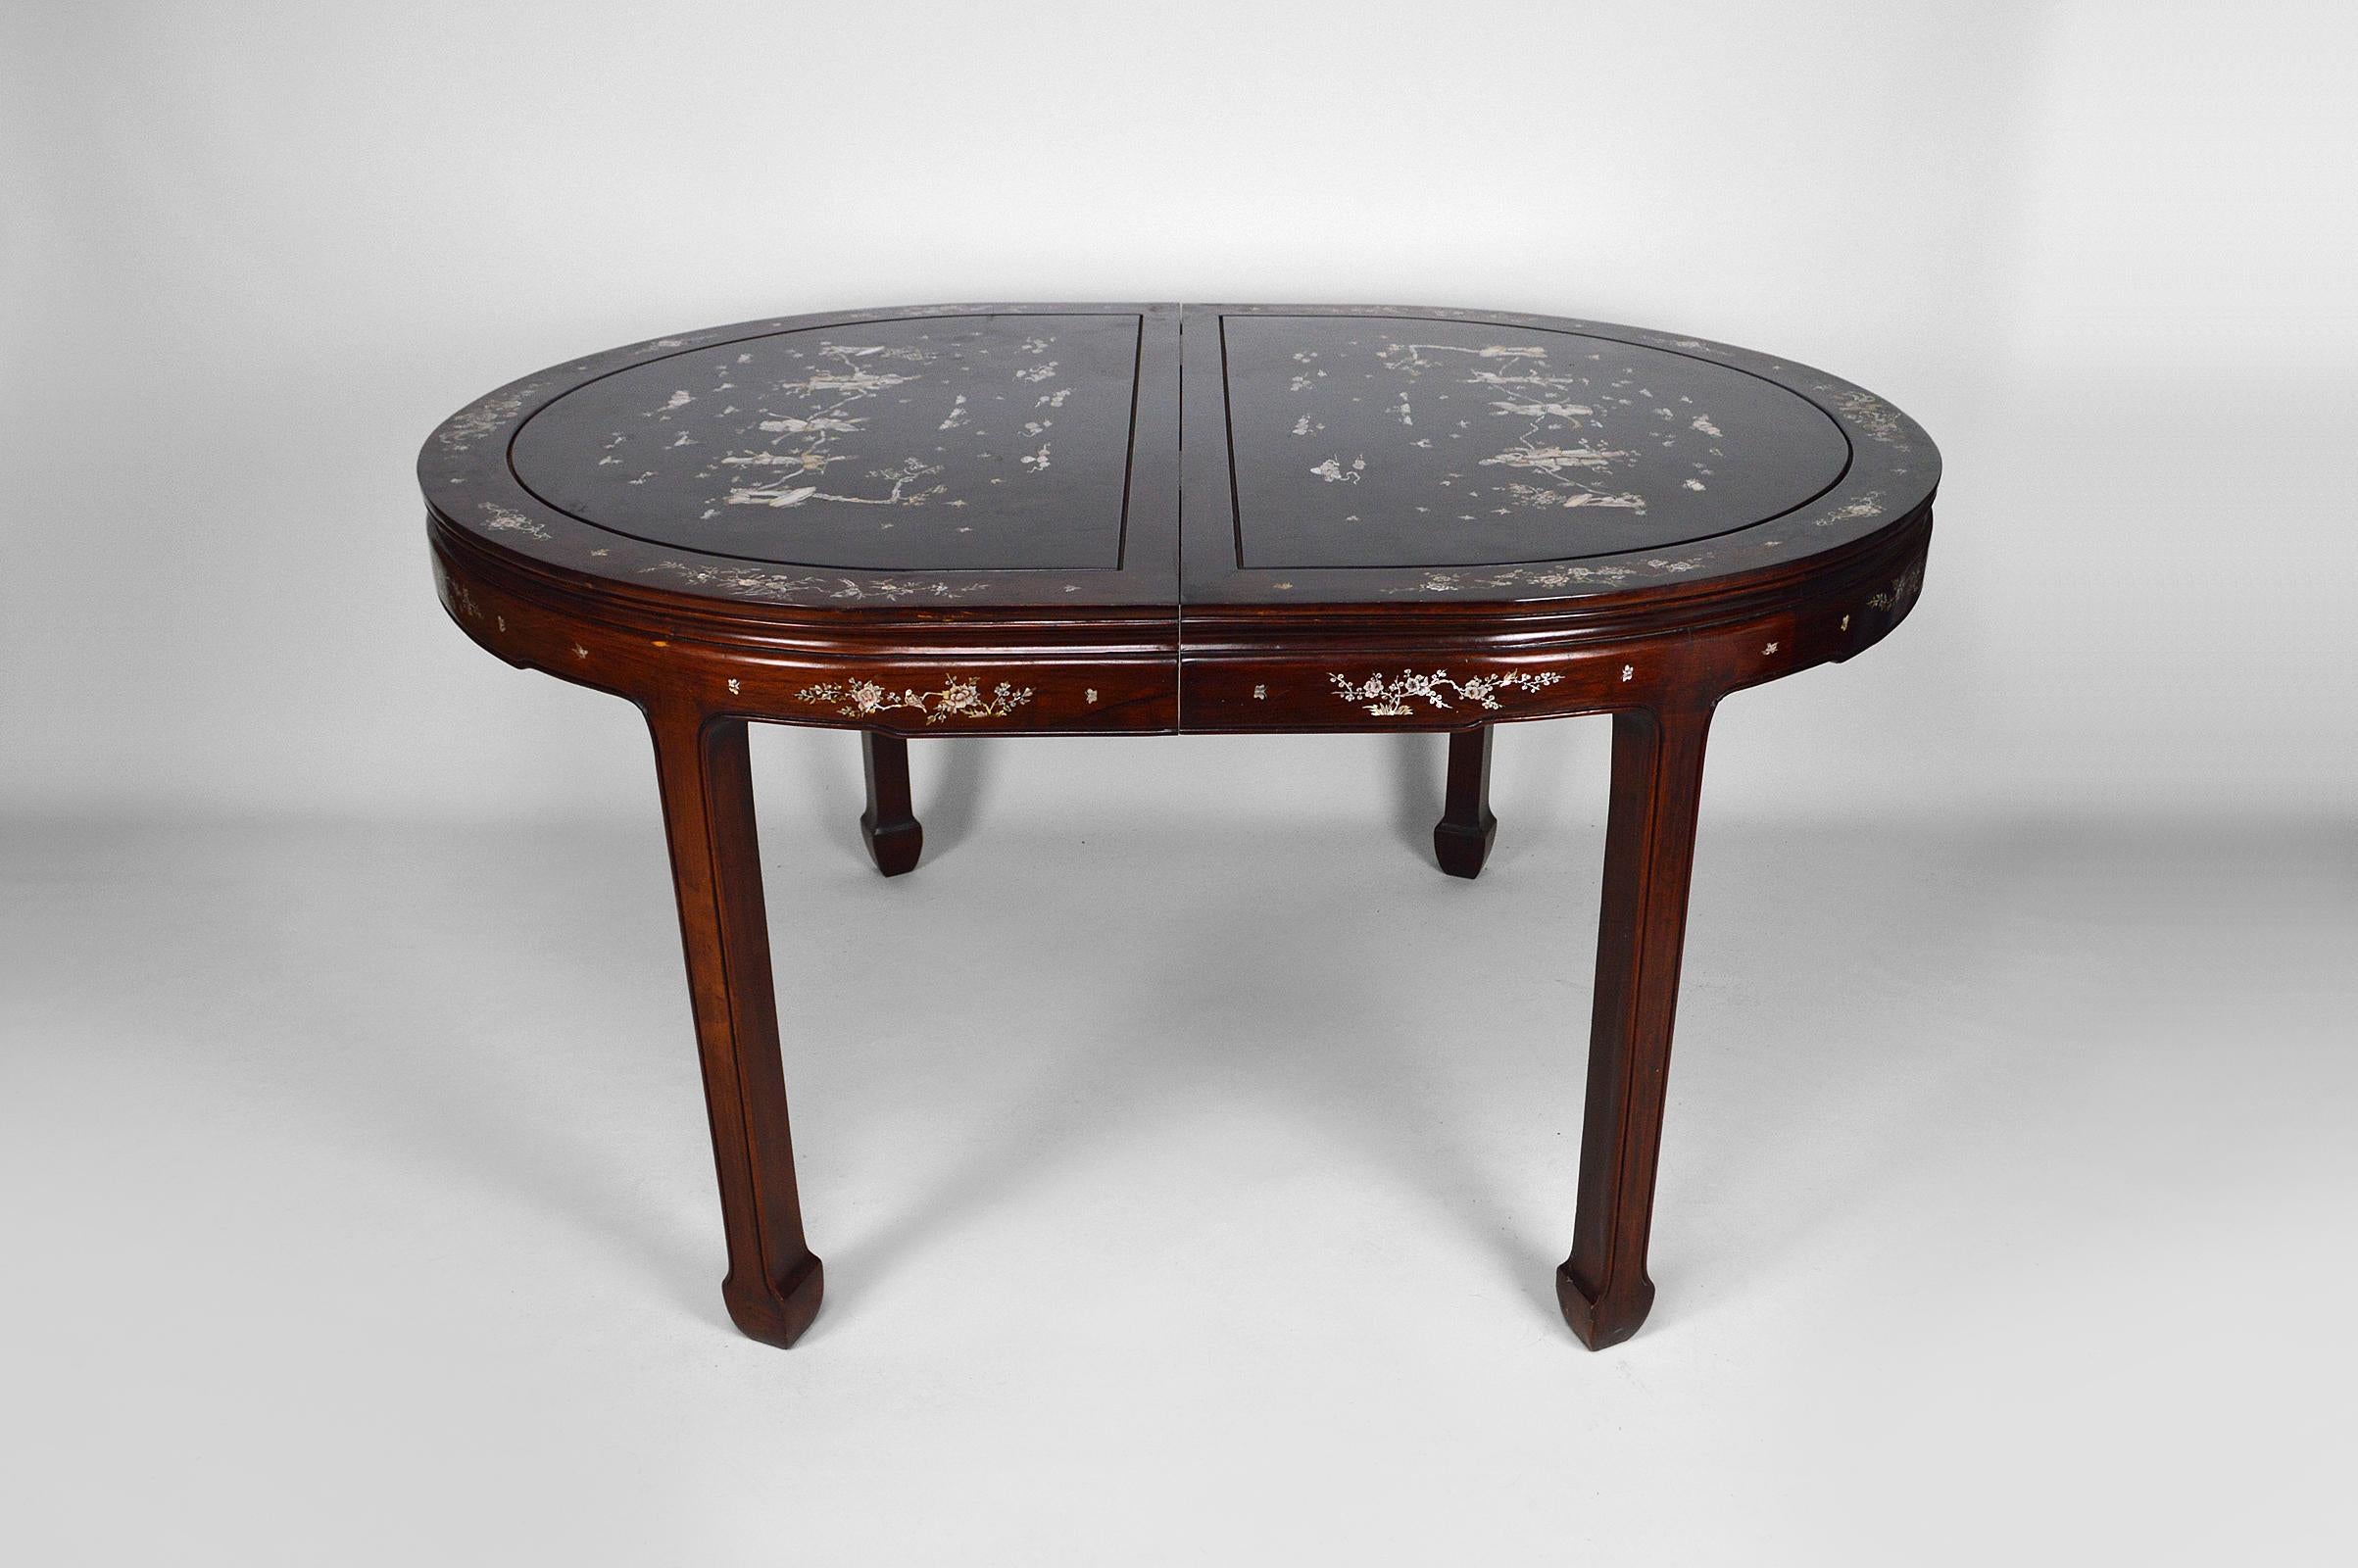 Chinese Asian Inlaid Wooden Dining Table with Extensions, Mid-20th Century